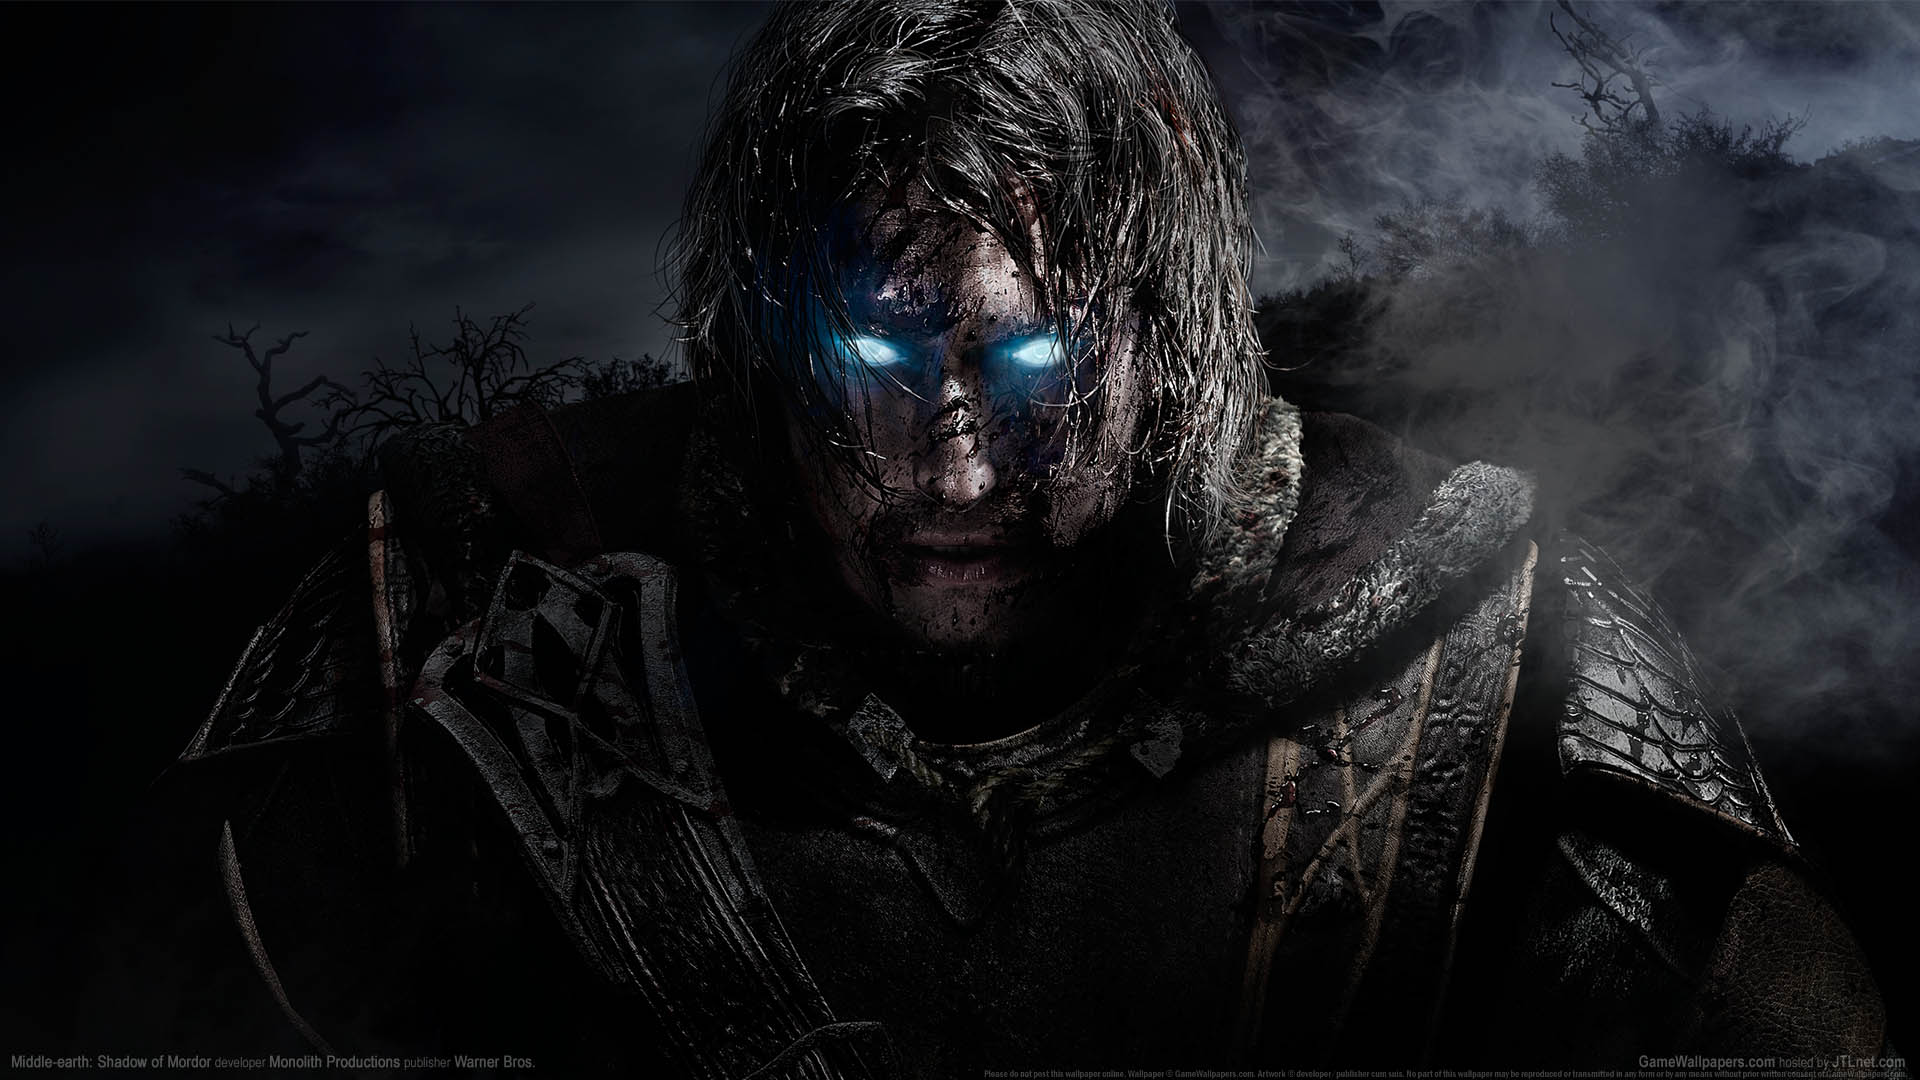 Middle-earth: Shadow of Mordor wallpaper 01 1920x1080